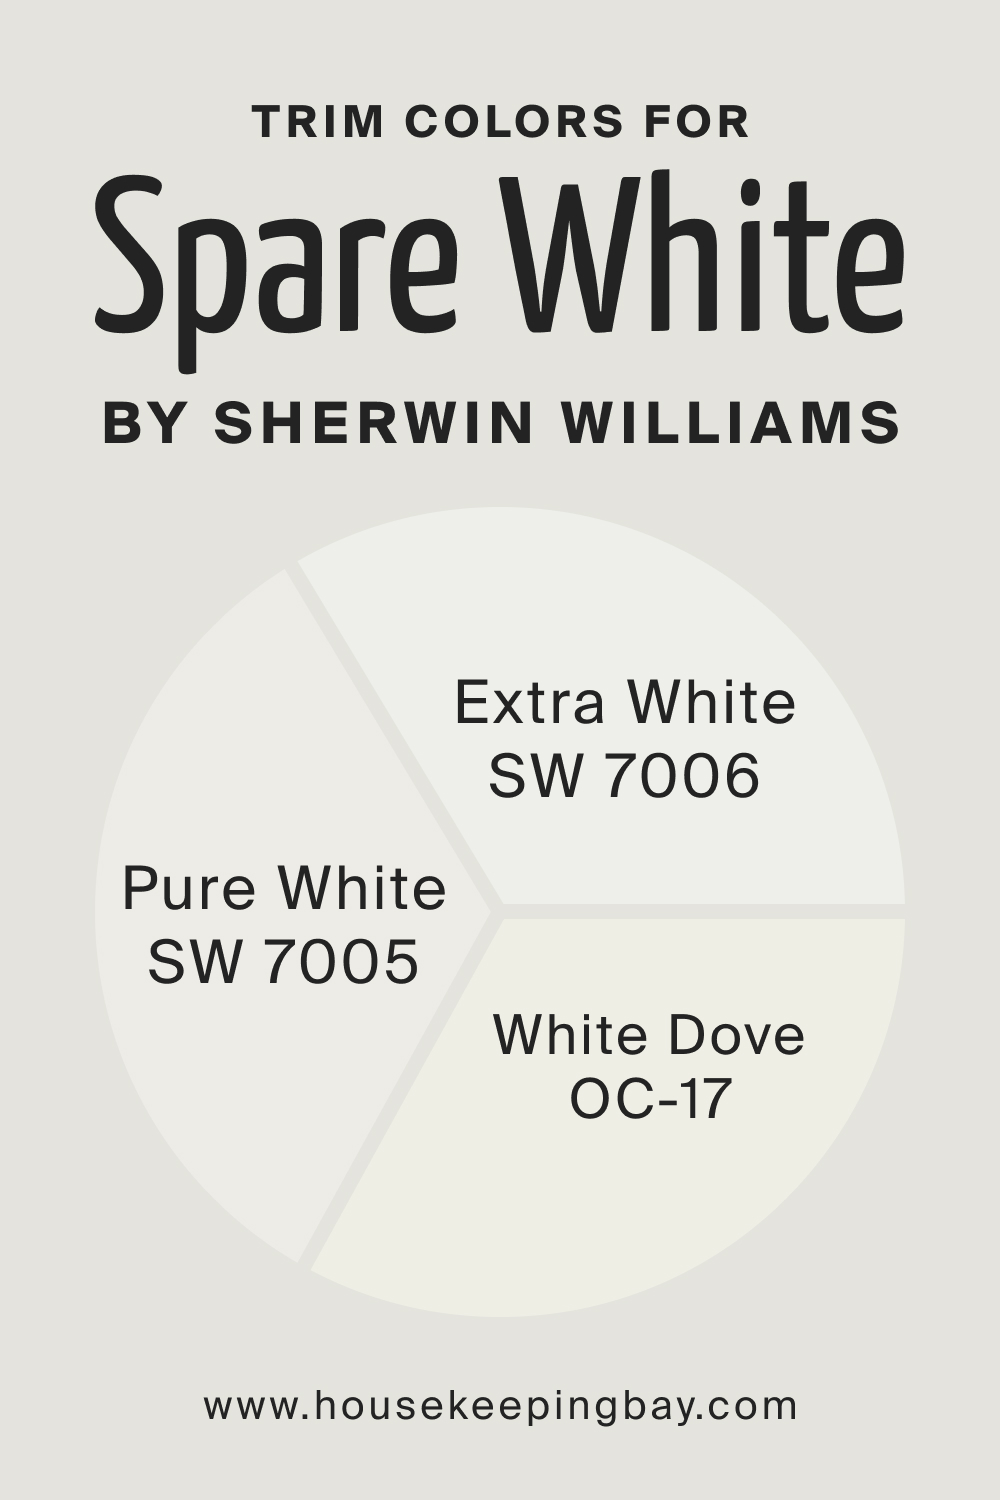 Trim Color for SW Spare White by Sherwin Williams